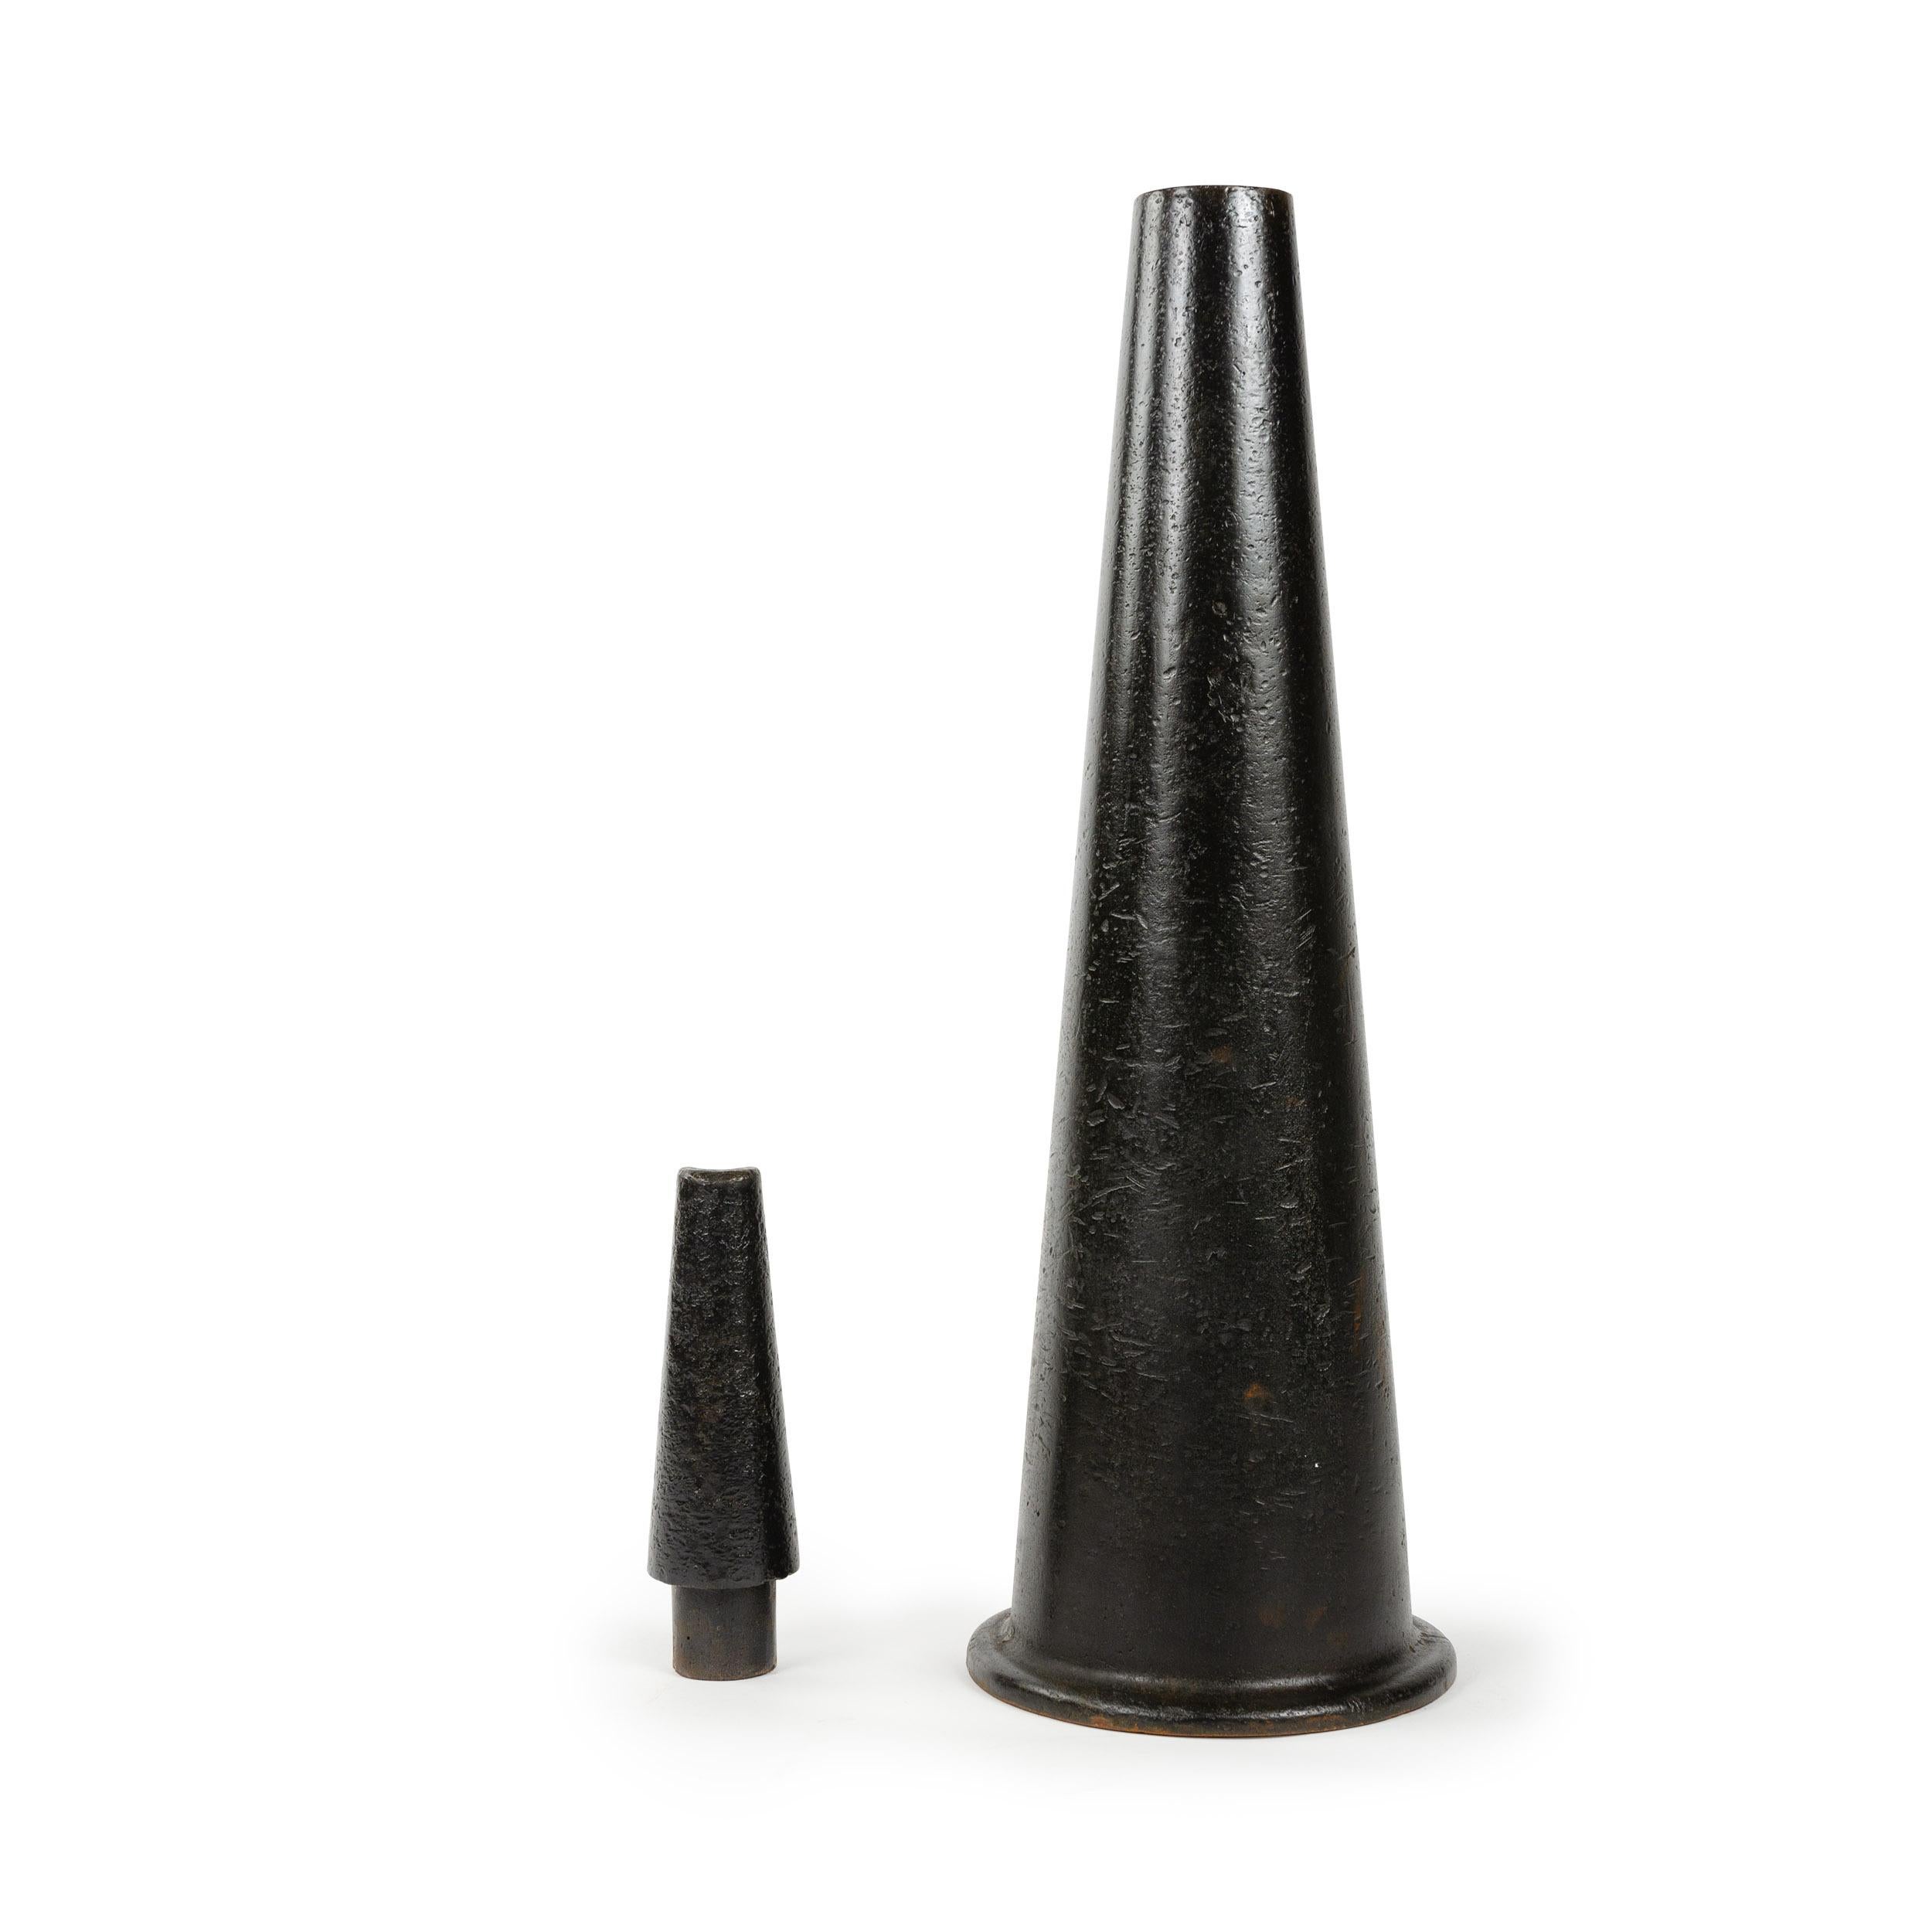 A very fine example of a 19th century patent blacksmiths cone mandrel in patinated steel, manufactured by Wiley & Russell Mfg. Co. The unique feature of this cone is the removable tip with the same socket section as the cone. Wiley & Russell was